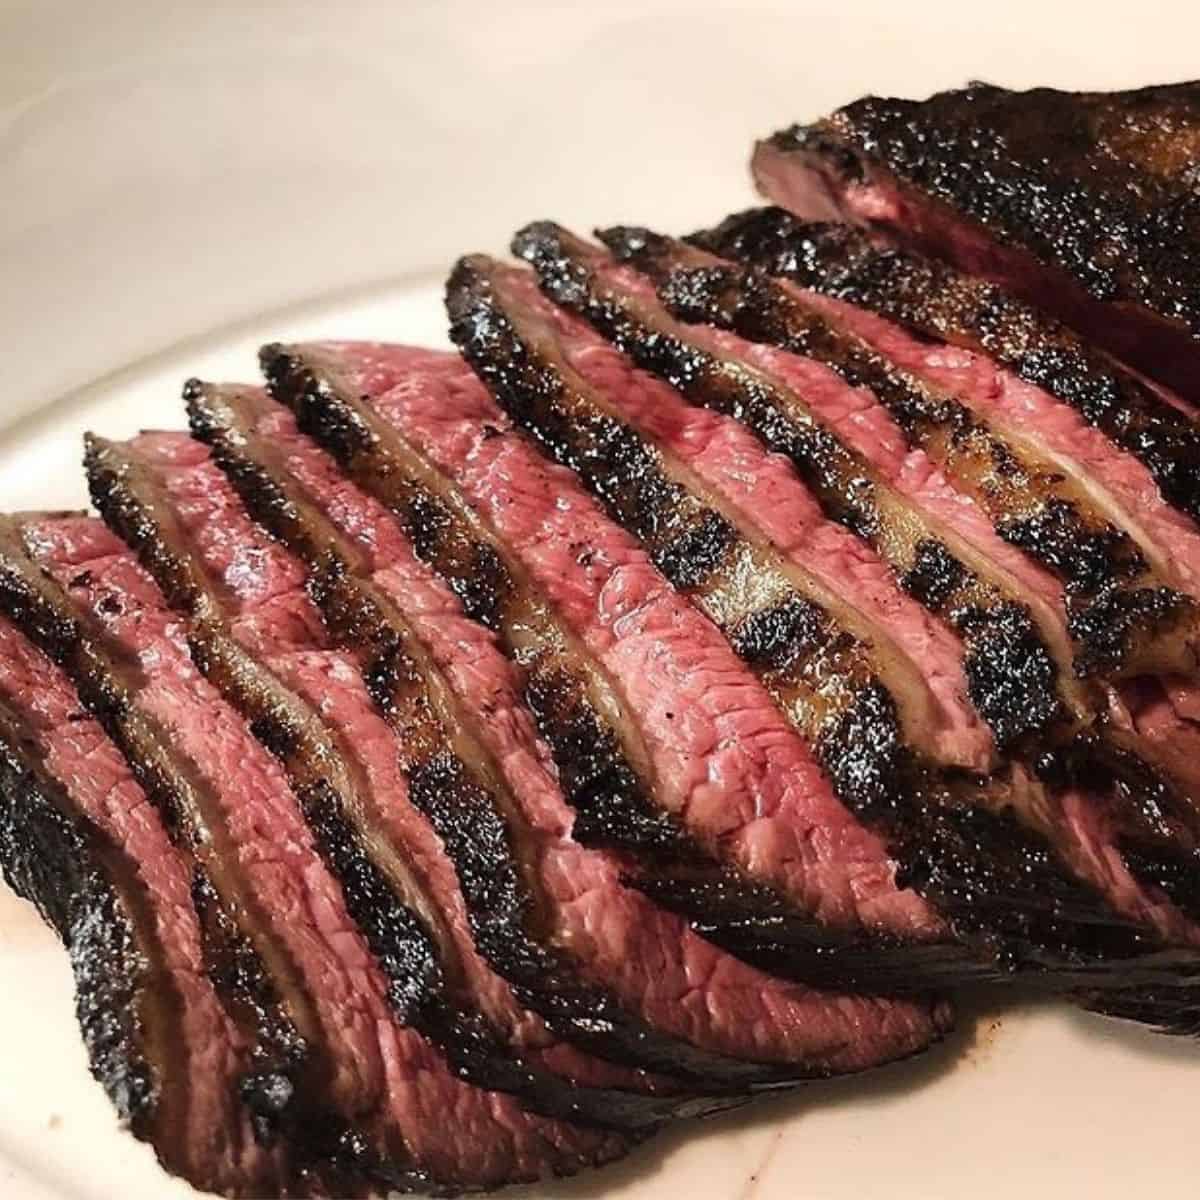 picanha by Zelman Meats